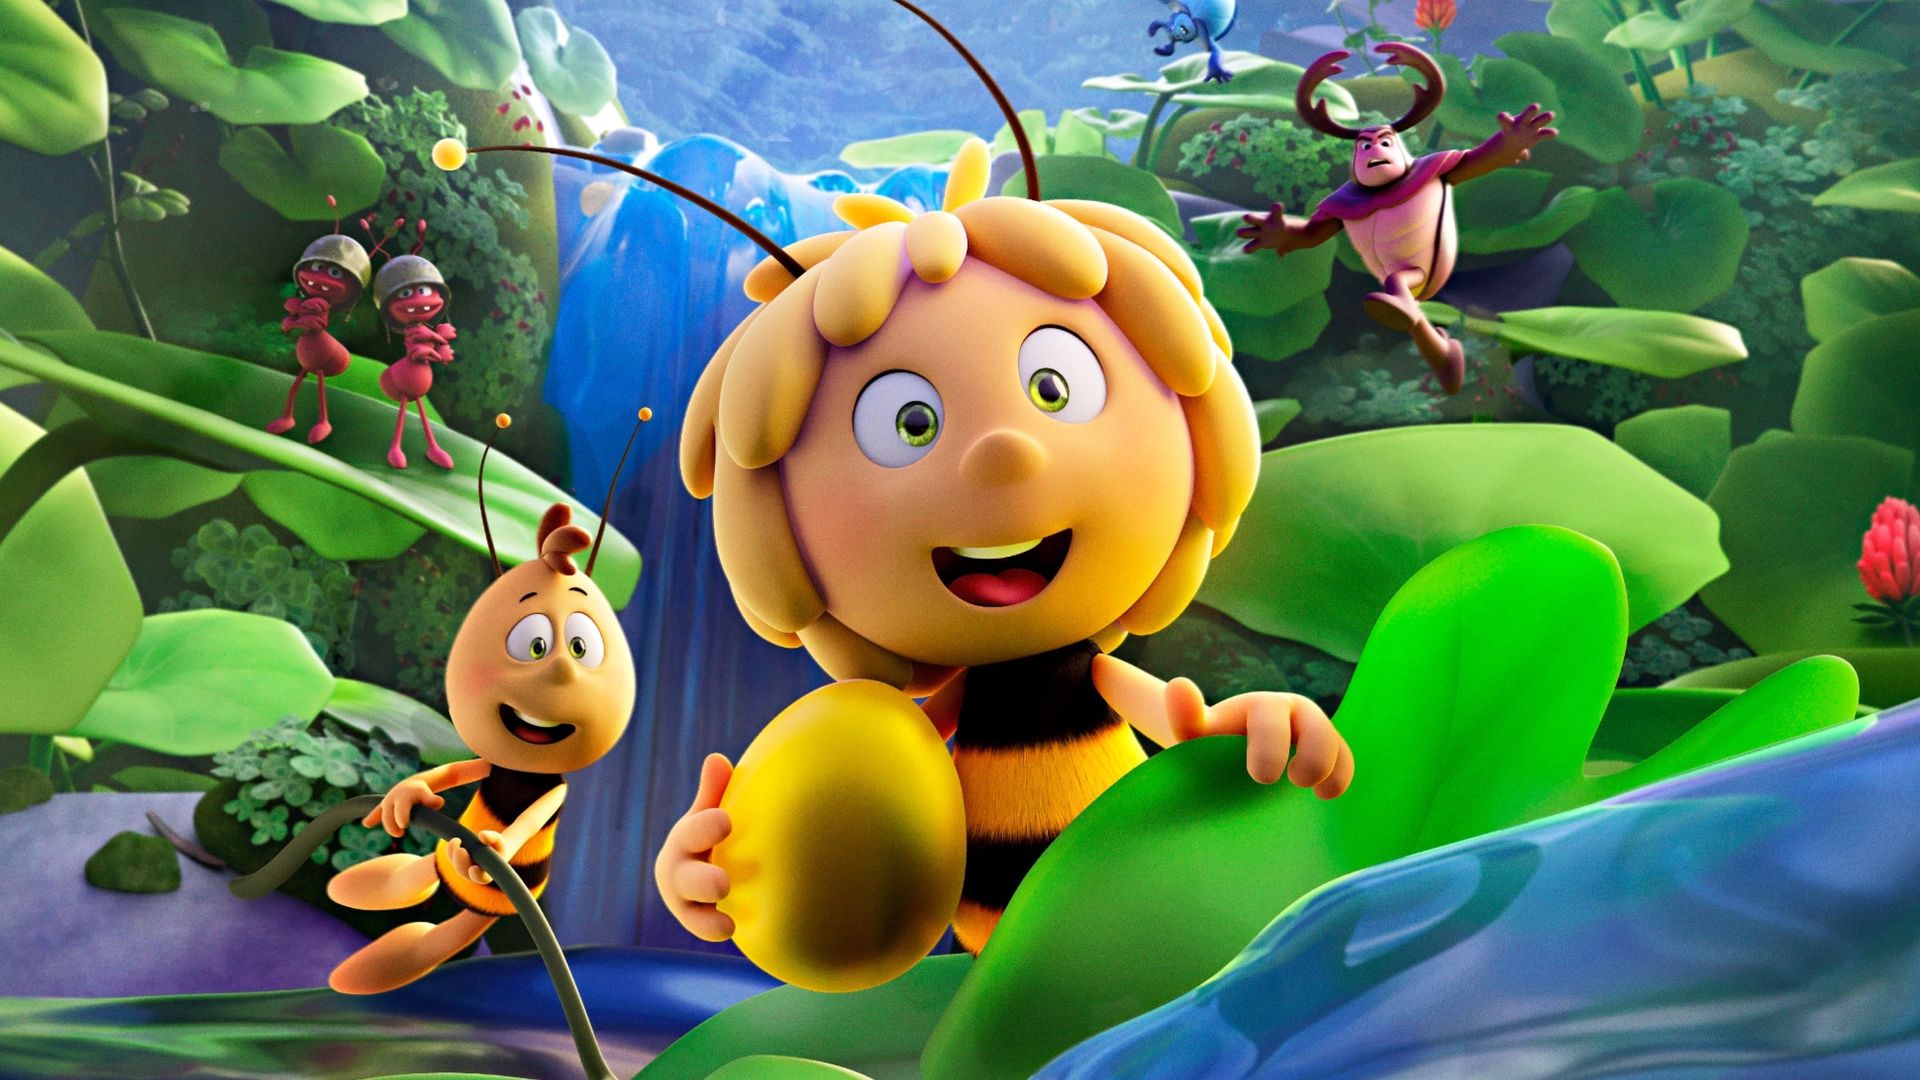 Maya the Bee 3: The Golden Orb Backdrop